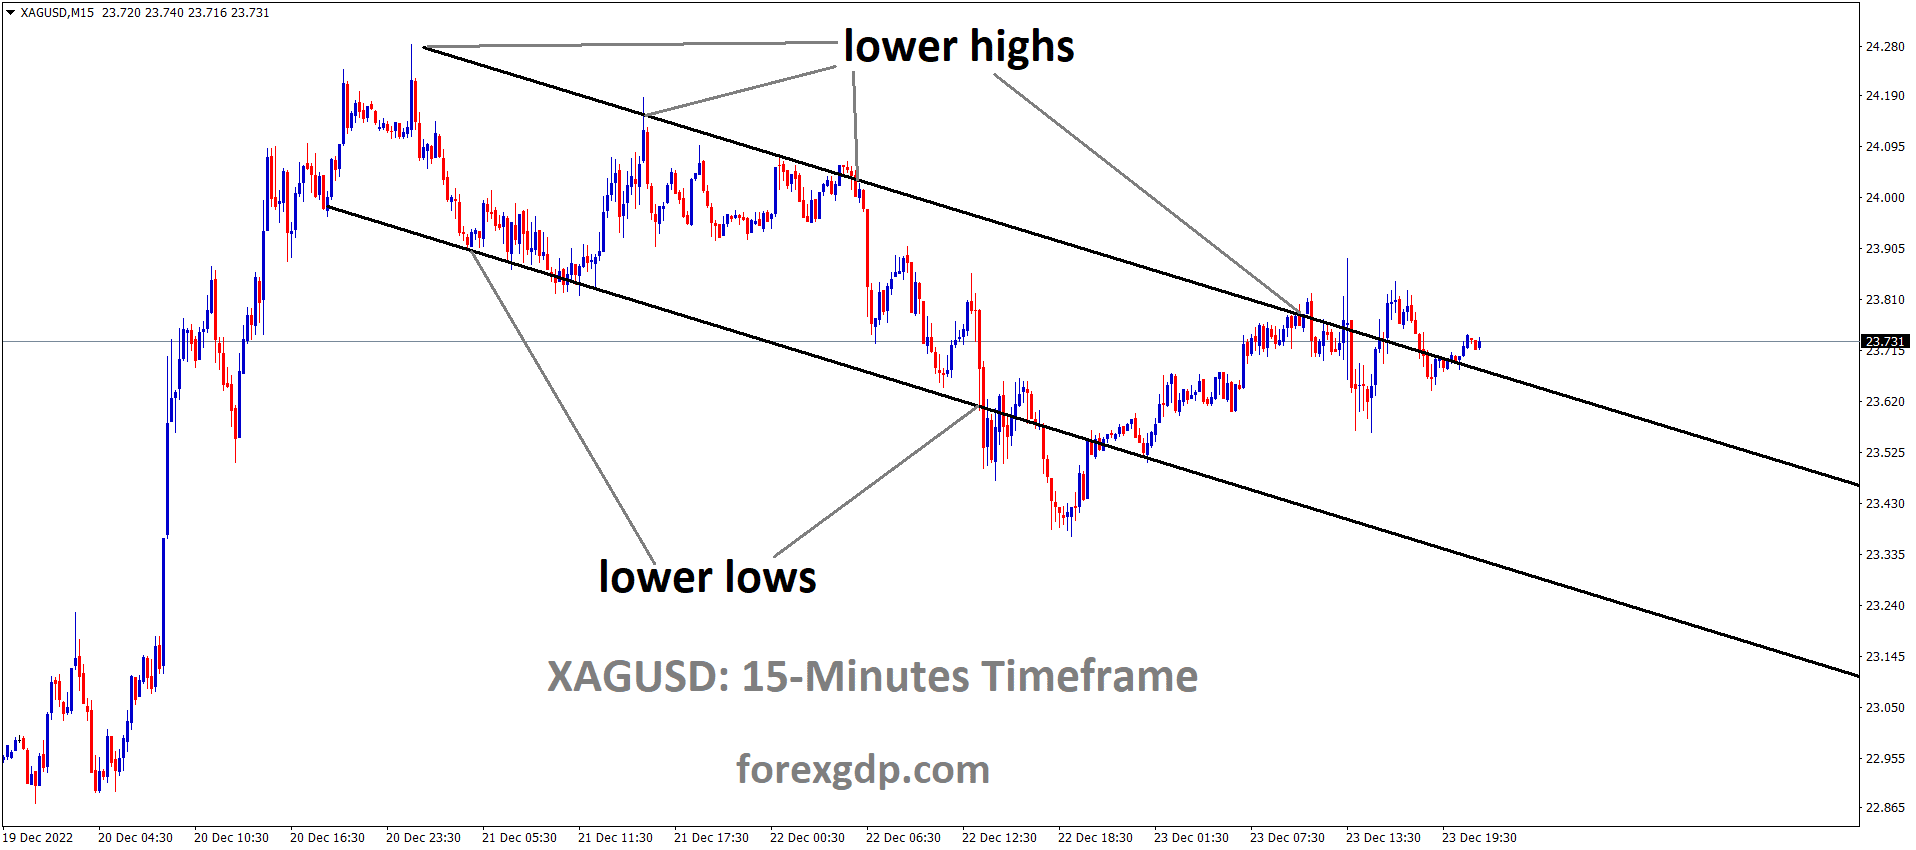 XAGUSD is moving in the Descending channel and the market has reached the lower high area of the channel